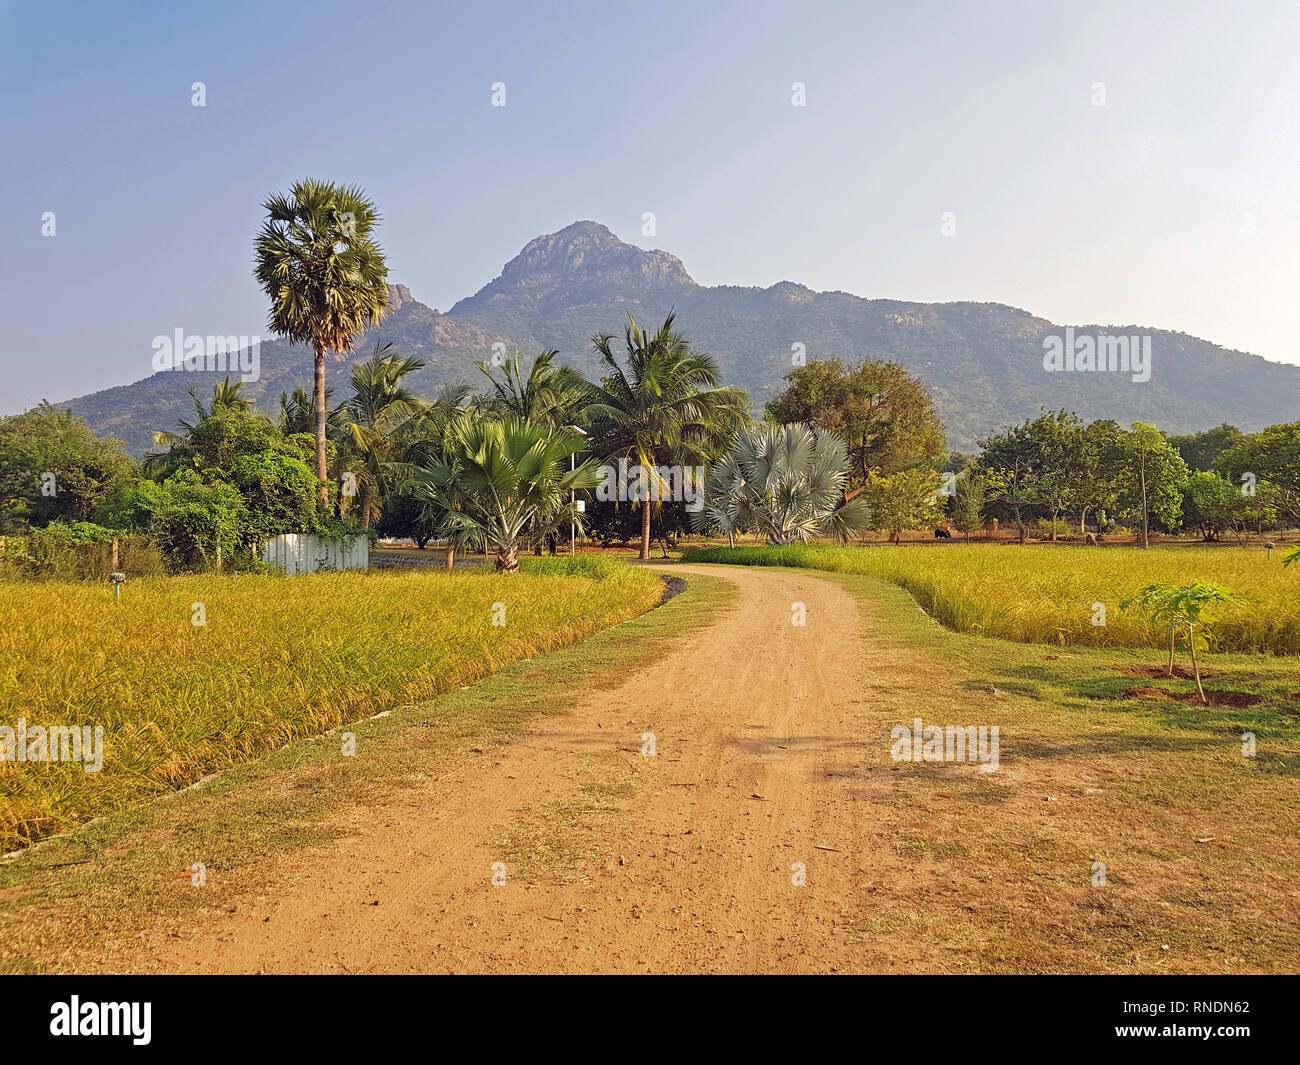 The mountain Arunachala in Tiruvannamalai Tamil Nadu India is referred to in the ancient scriptures as the oldest mountain on earth and modern researc Stock Photo